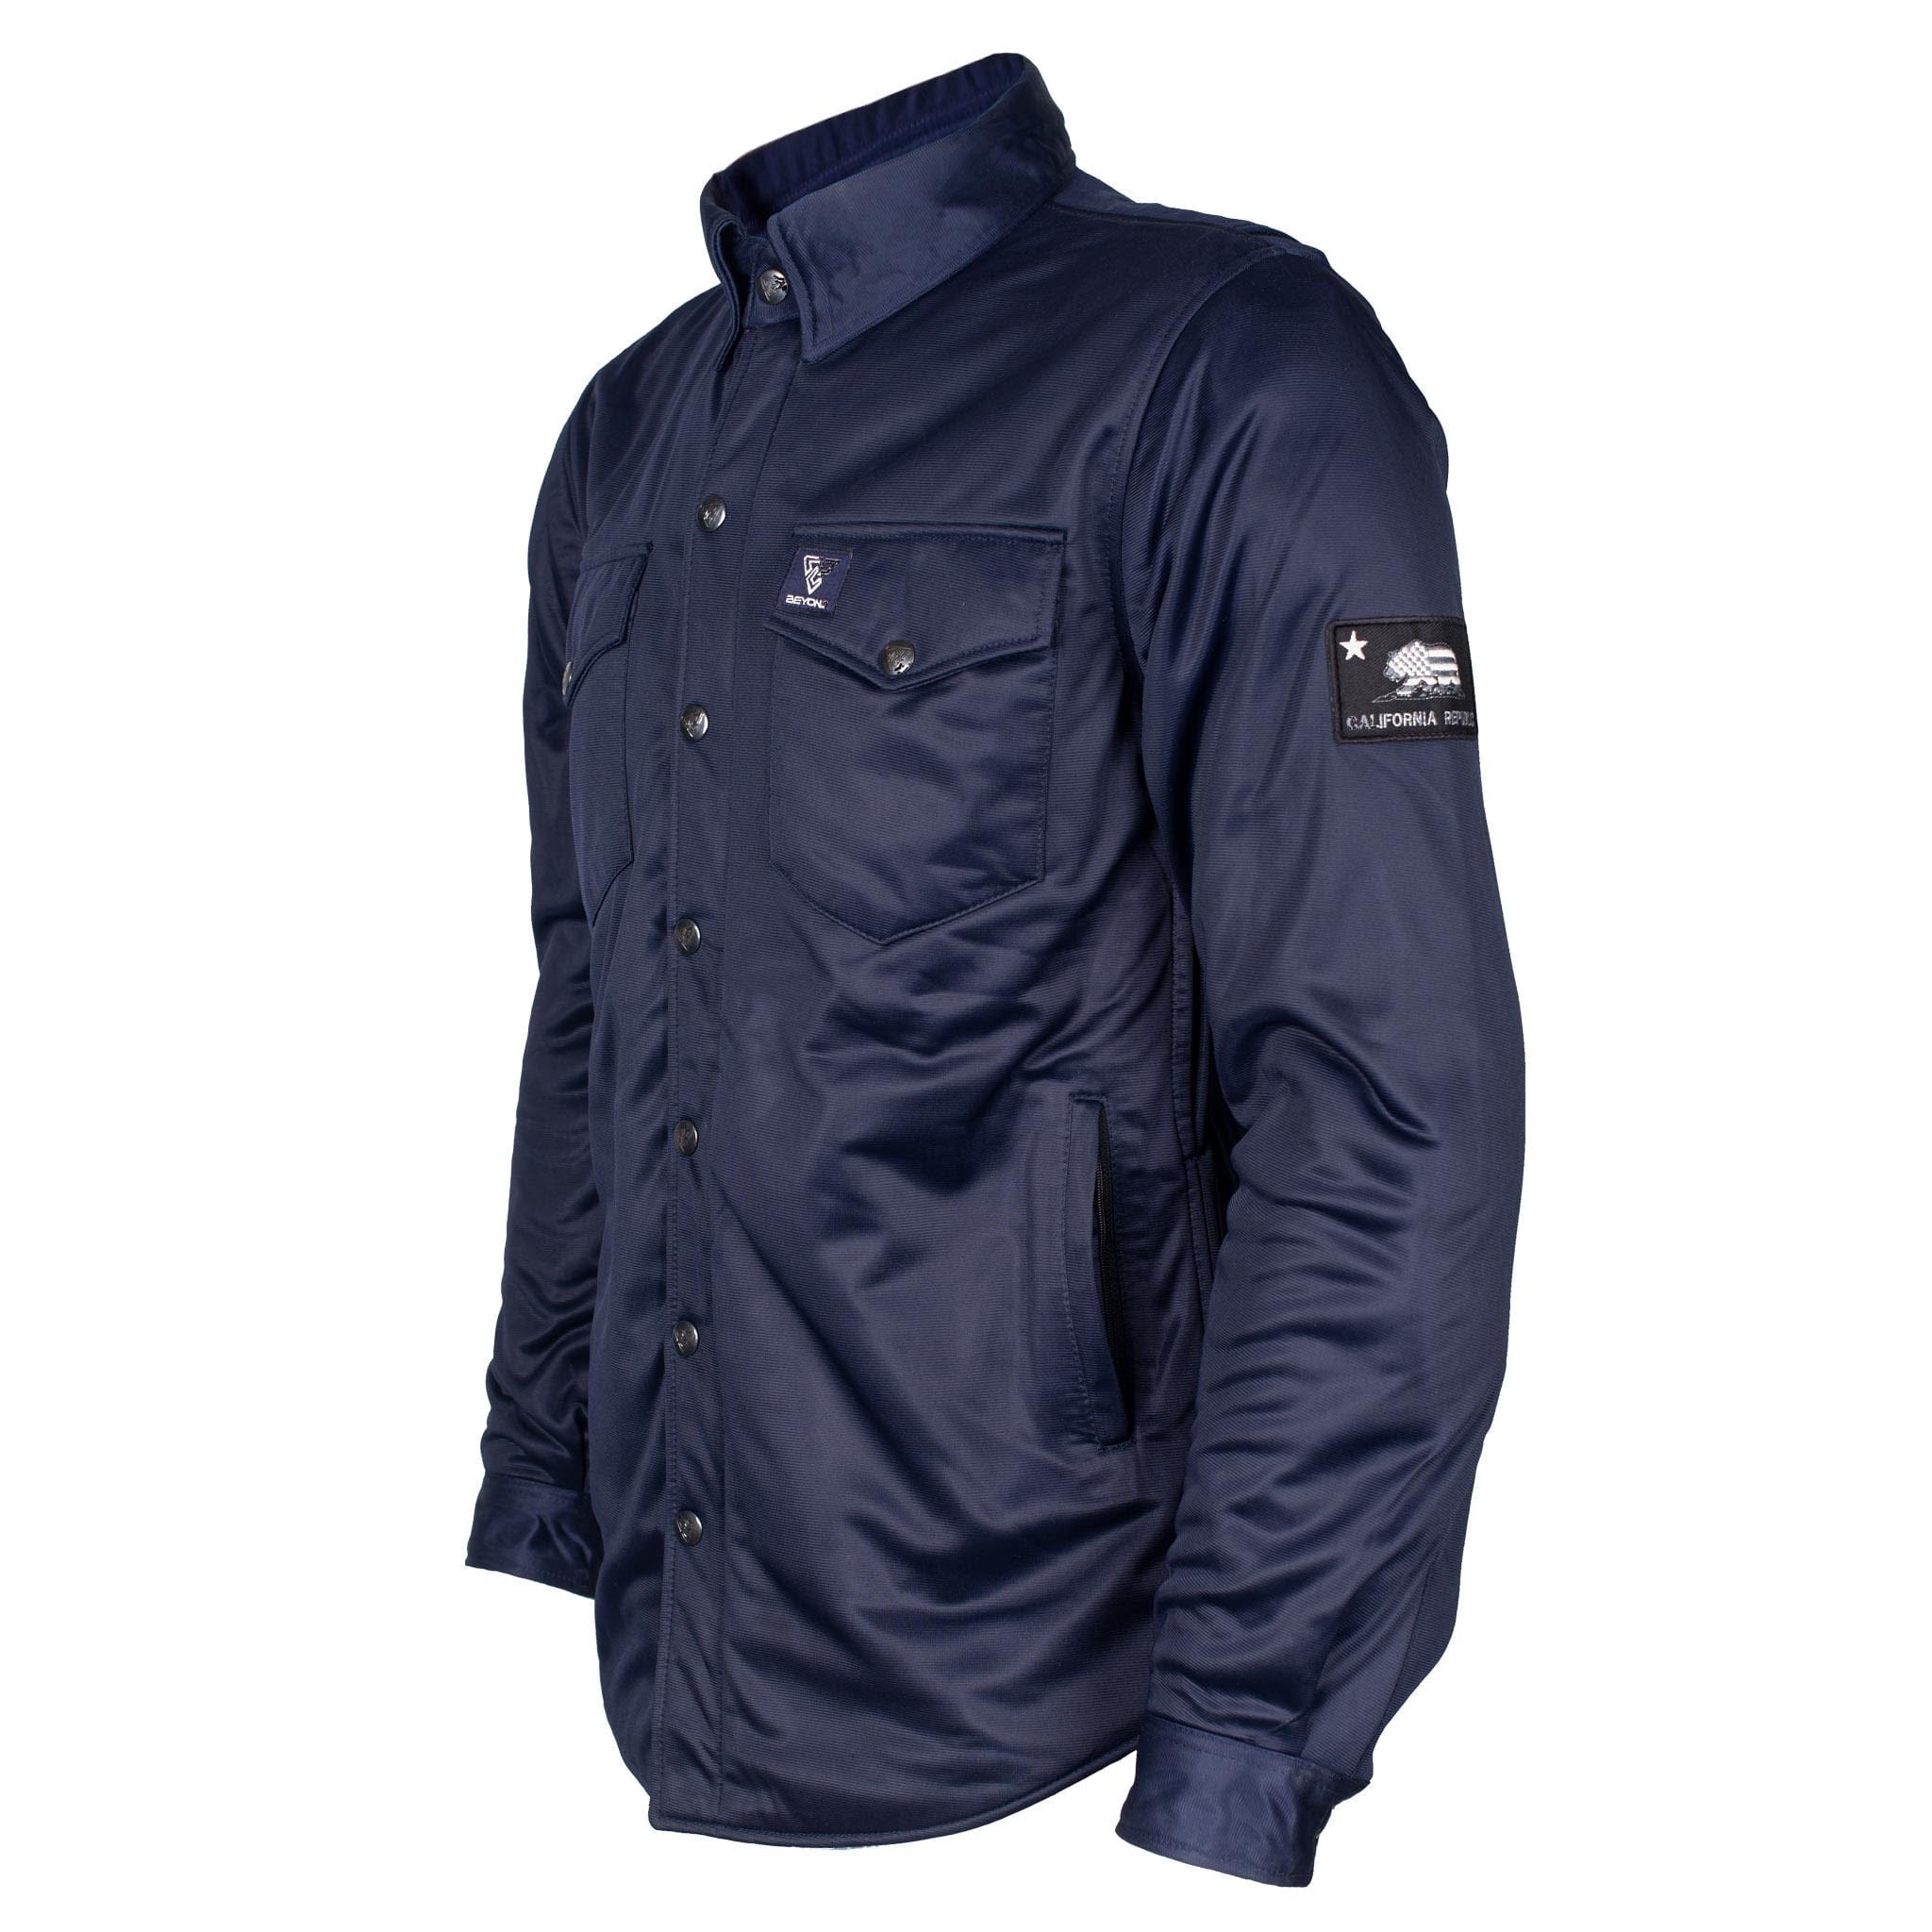 Ultra Protective Shirt - Navy Blue Solid